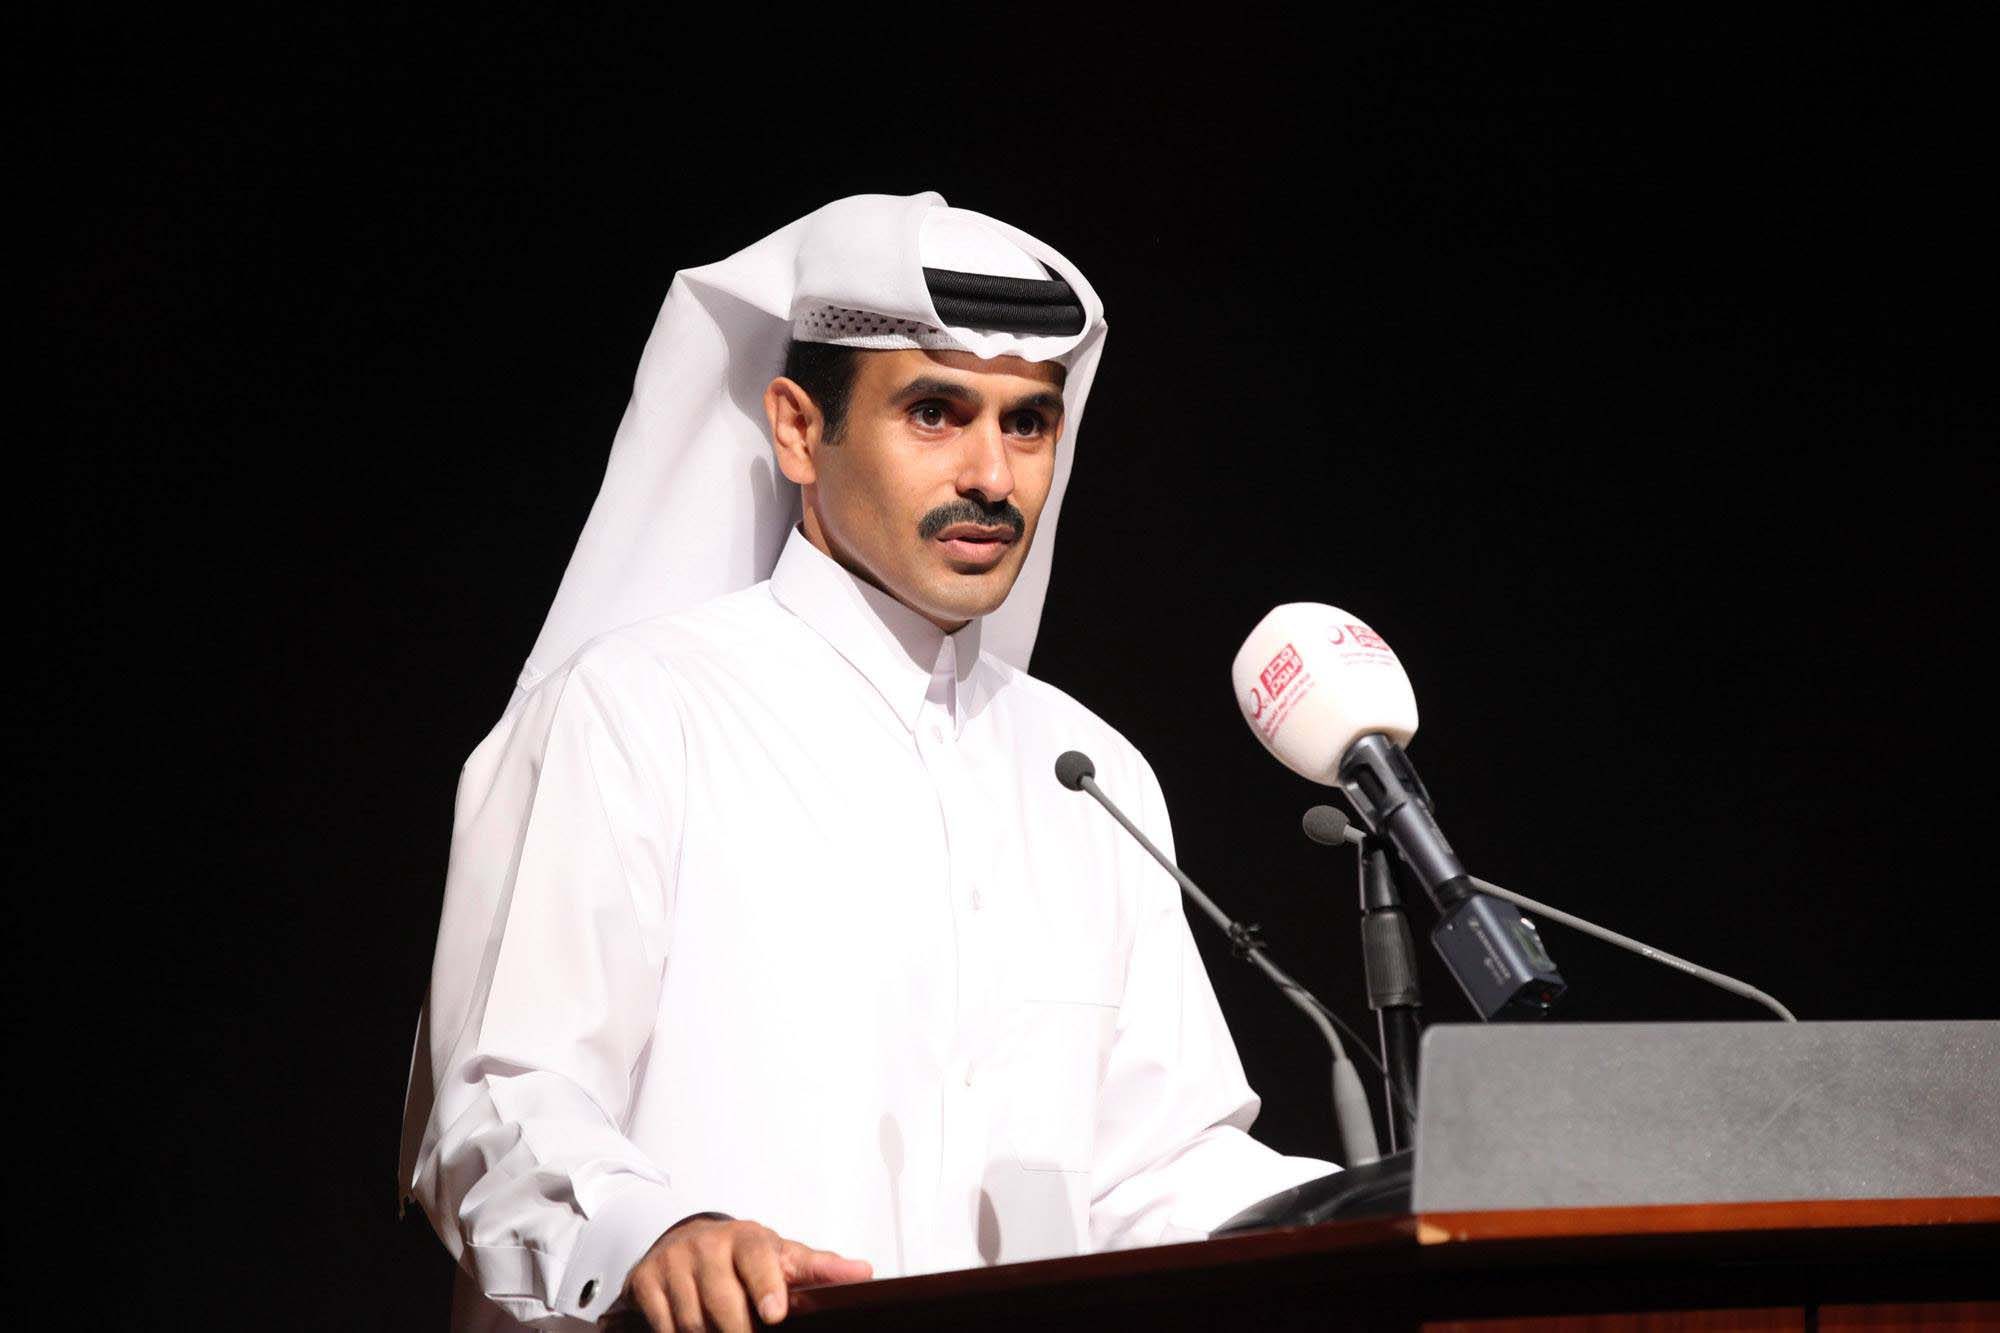 Peninsula: For Qatar’s underprivileged, even running water and electricity are not a given